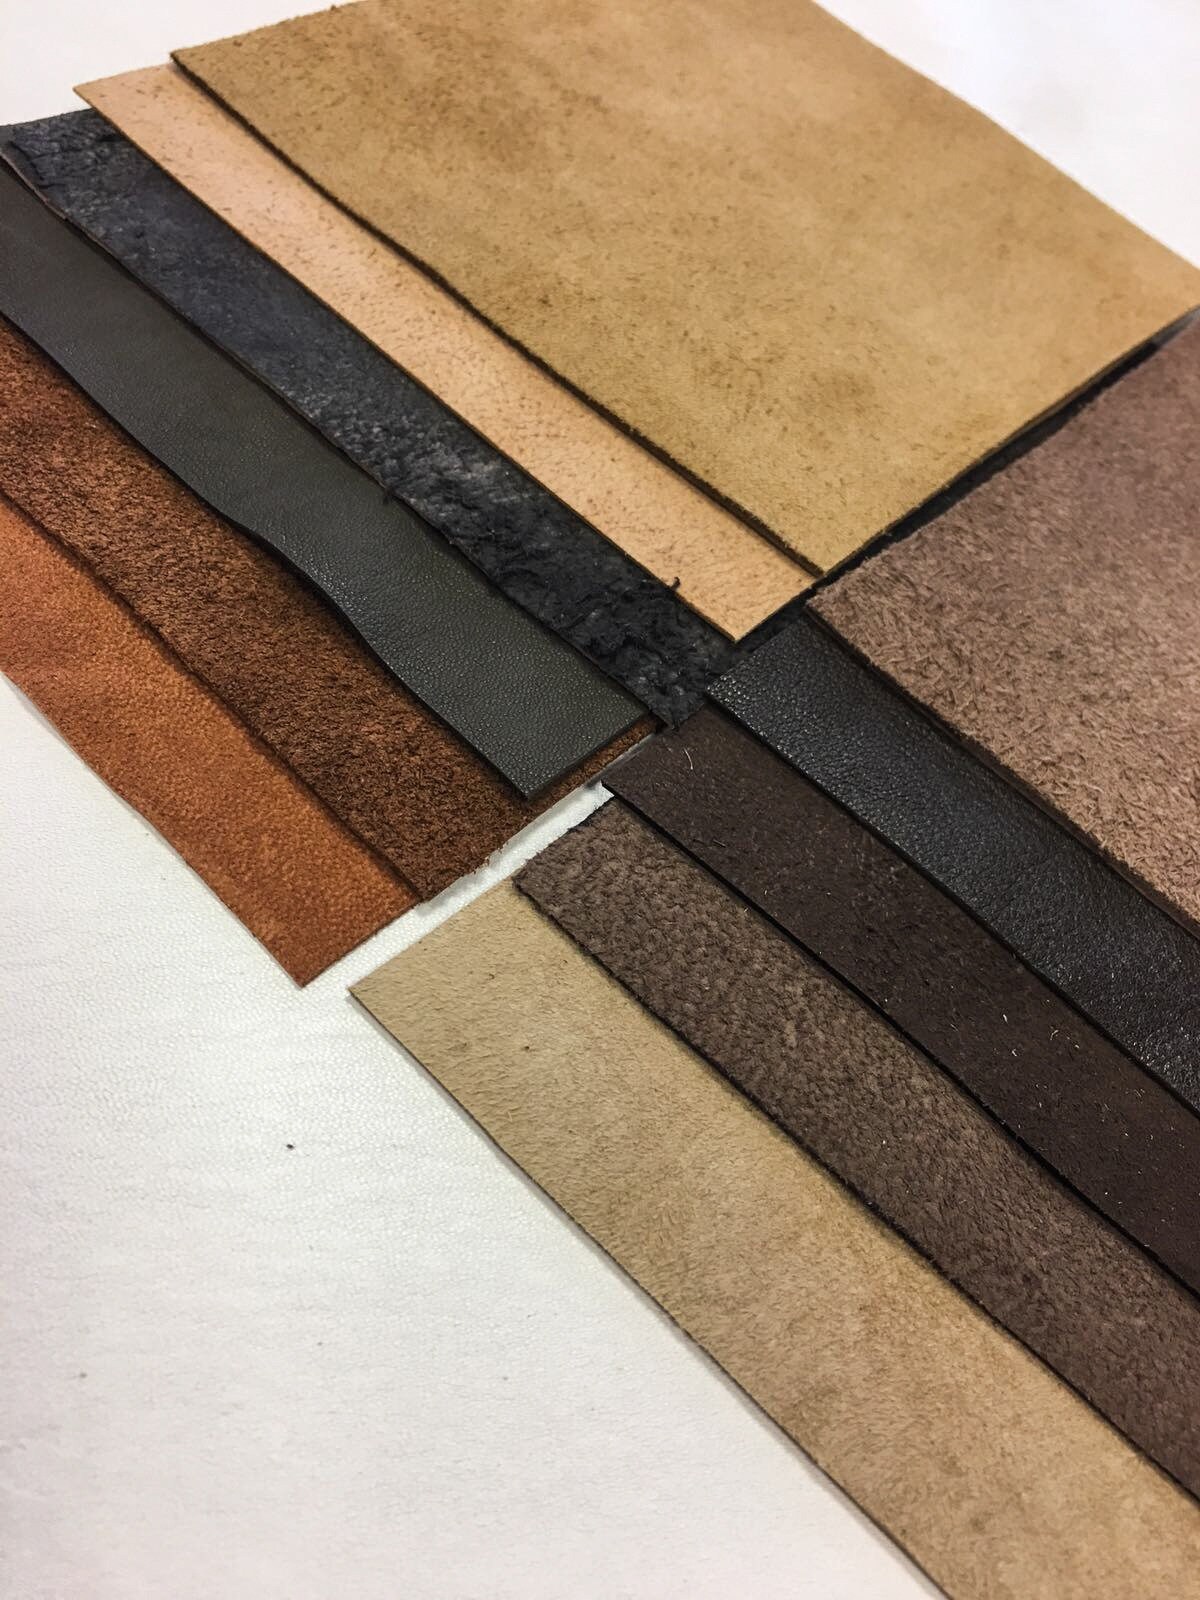 BROWN SHADES Leather Scraps Real Leather Pre Cut Sheet Set 5x5 Inch Craft  Pieces Textured Various Brown Leather Samples 4/8pieces per Pack 